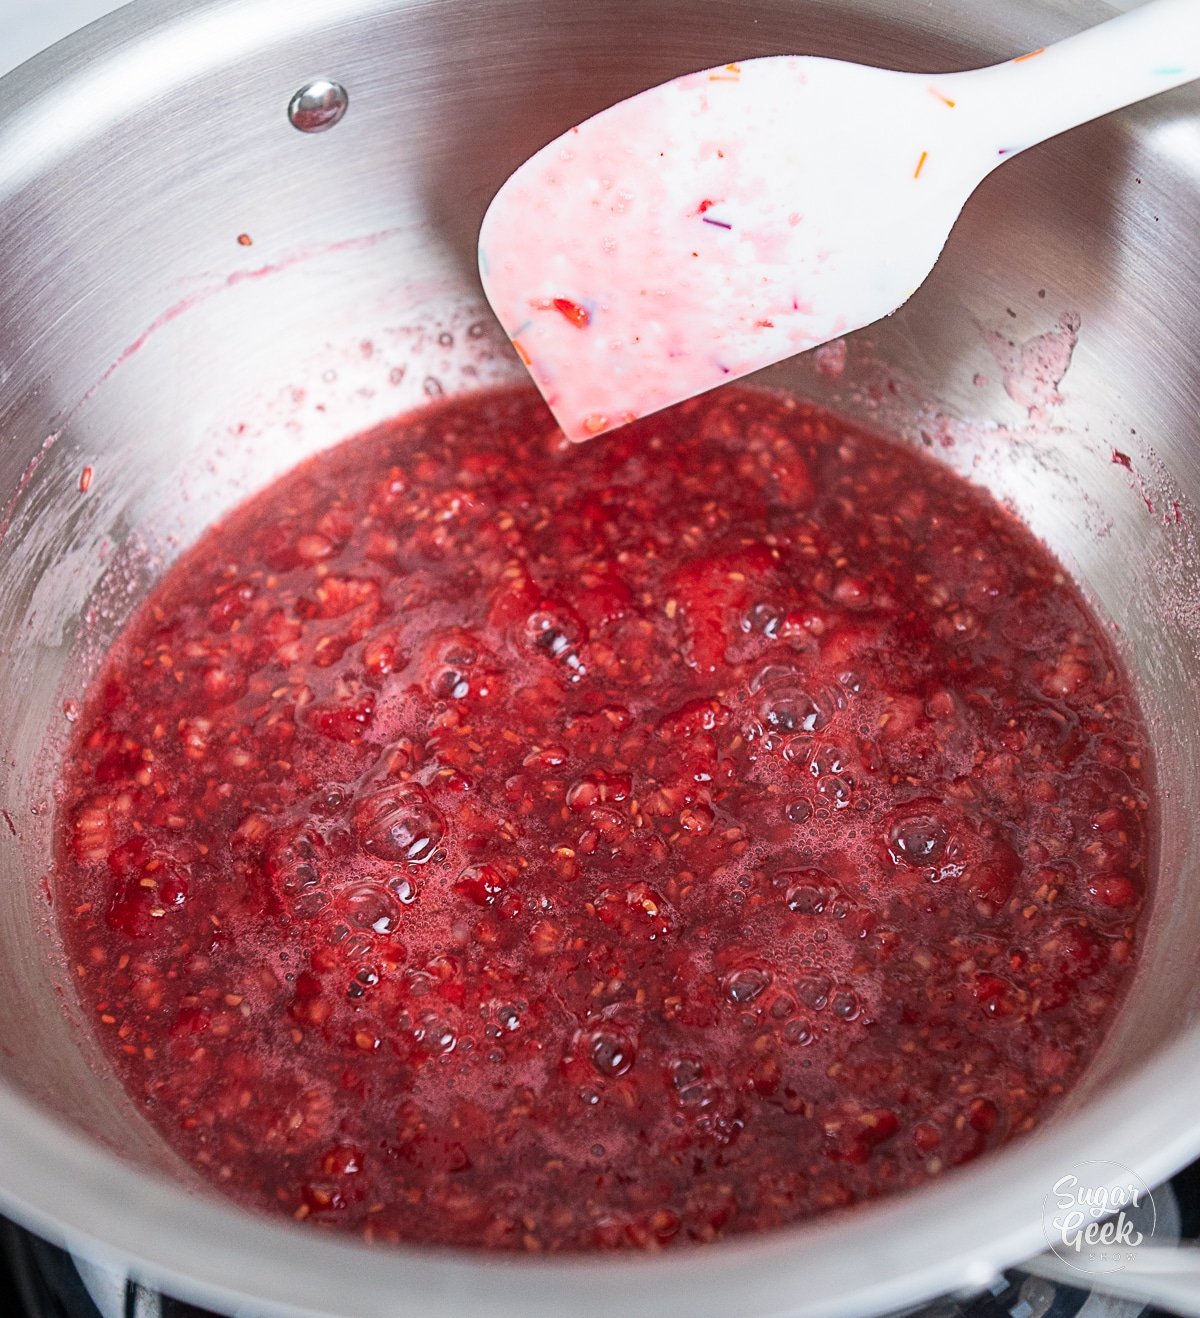 raspberries bubbling while being cooked in a pot.